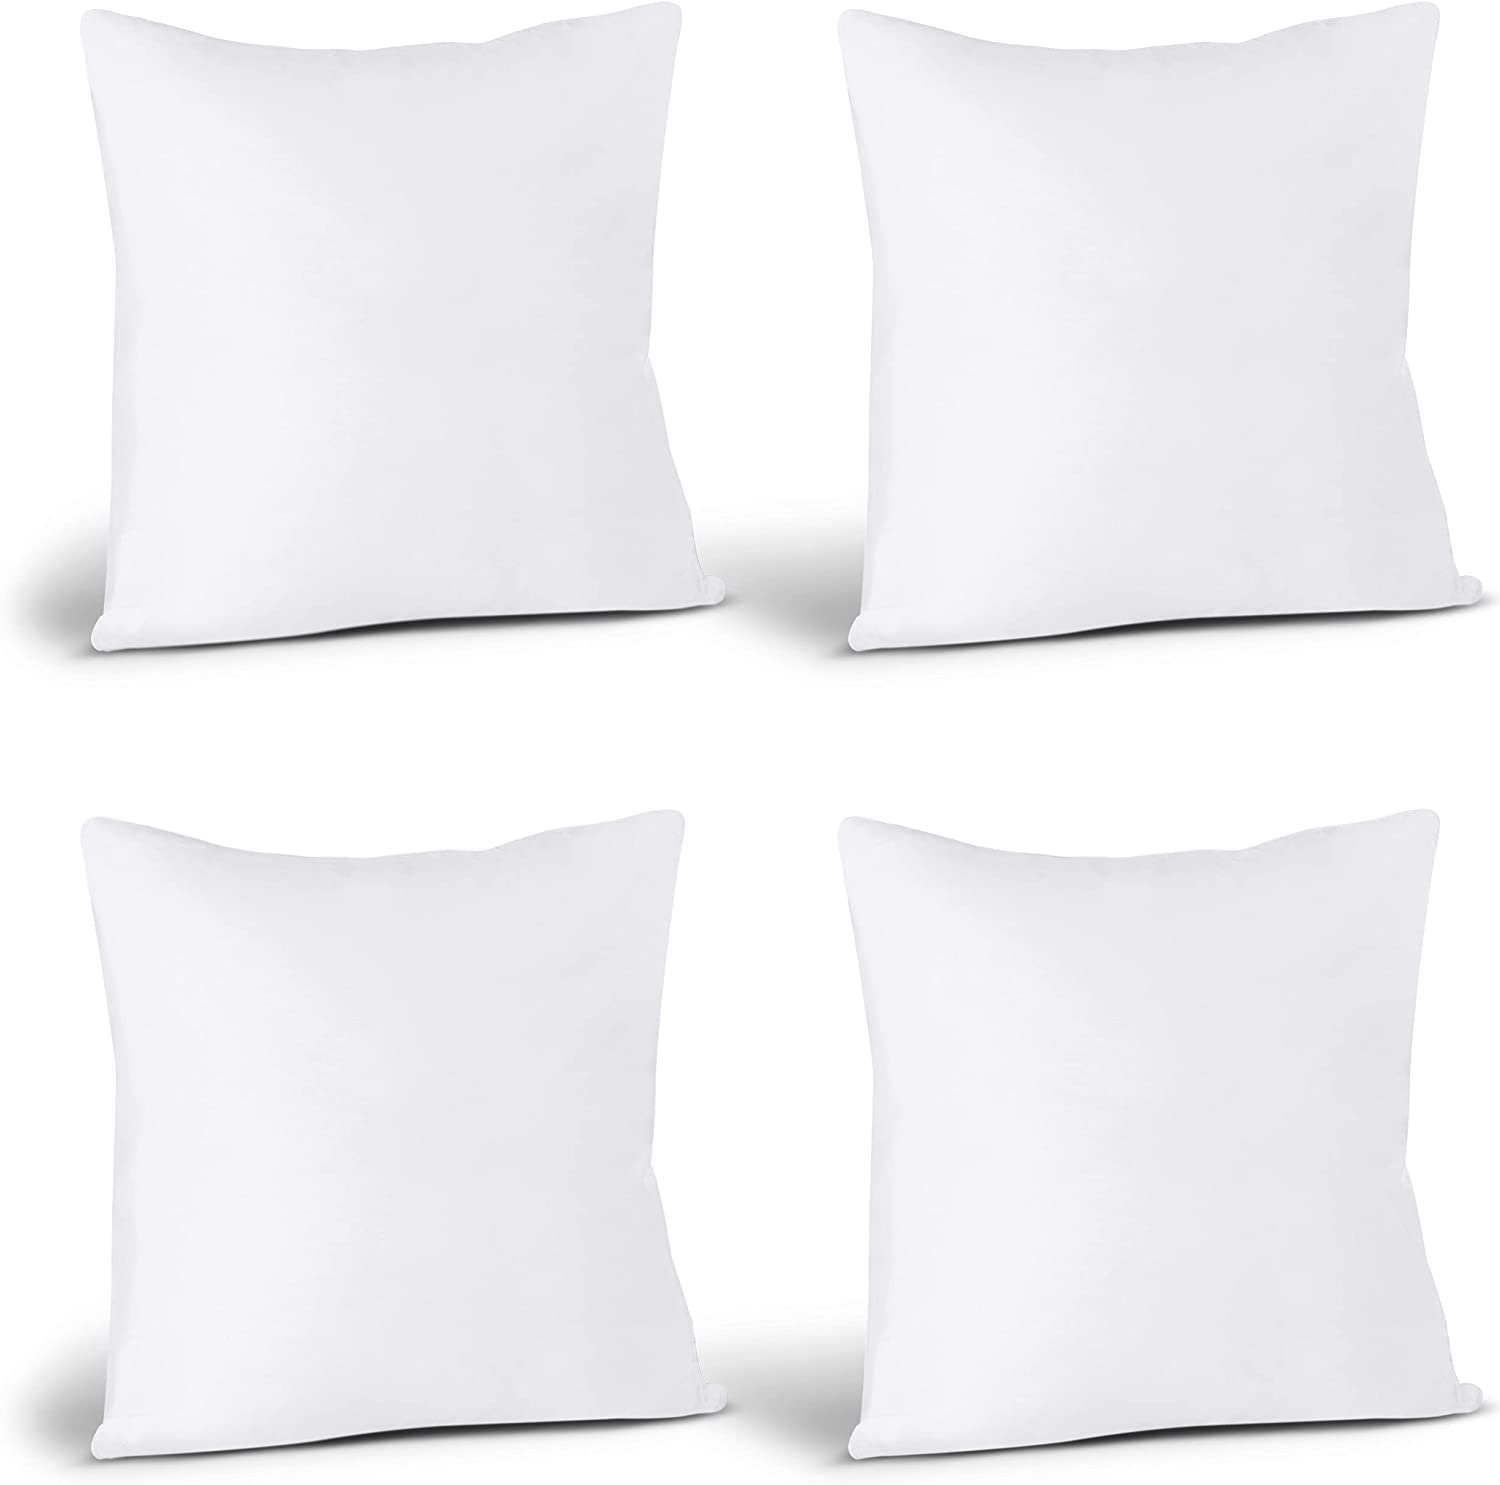 Utopia Bedding Throw Bed and Couch Pillows Insert 20 x 20 Inches for Home Bedroom Pack of 2